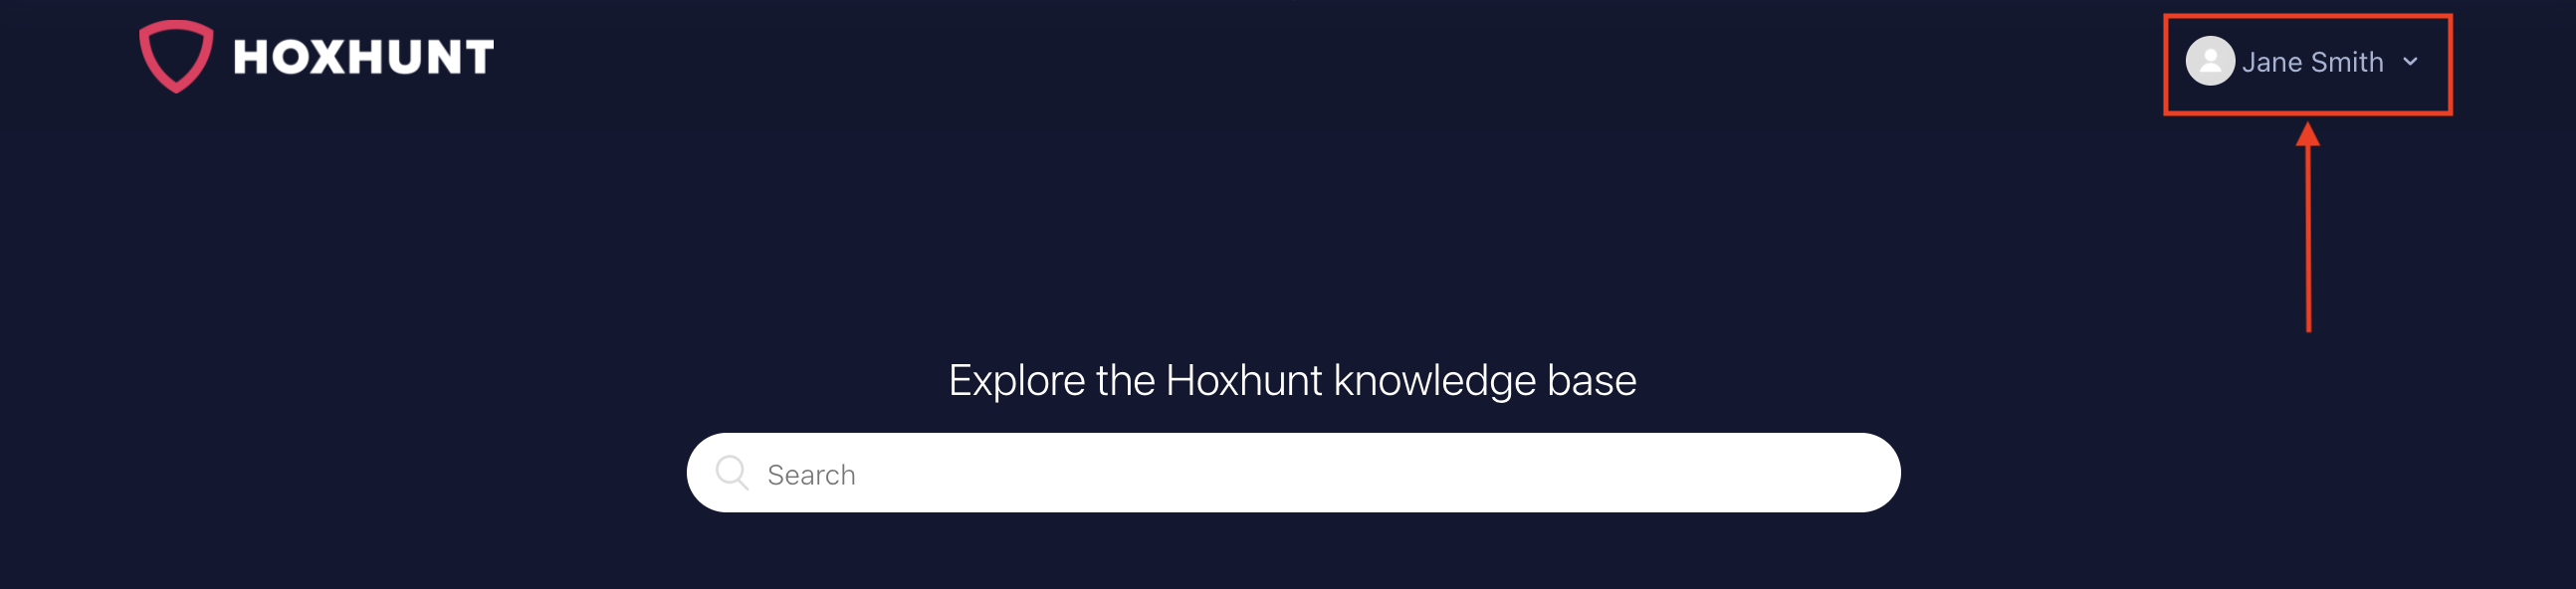 Hoxhunt_knowledgebase_-_signed_in.png